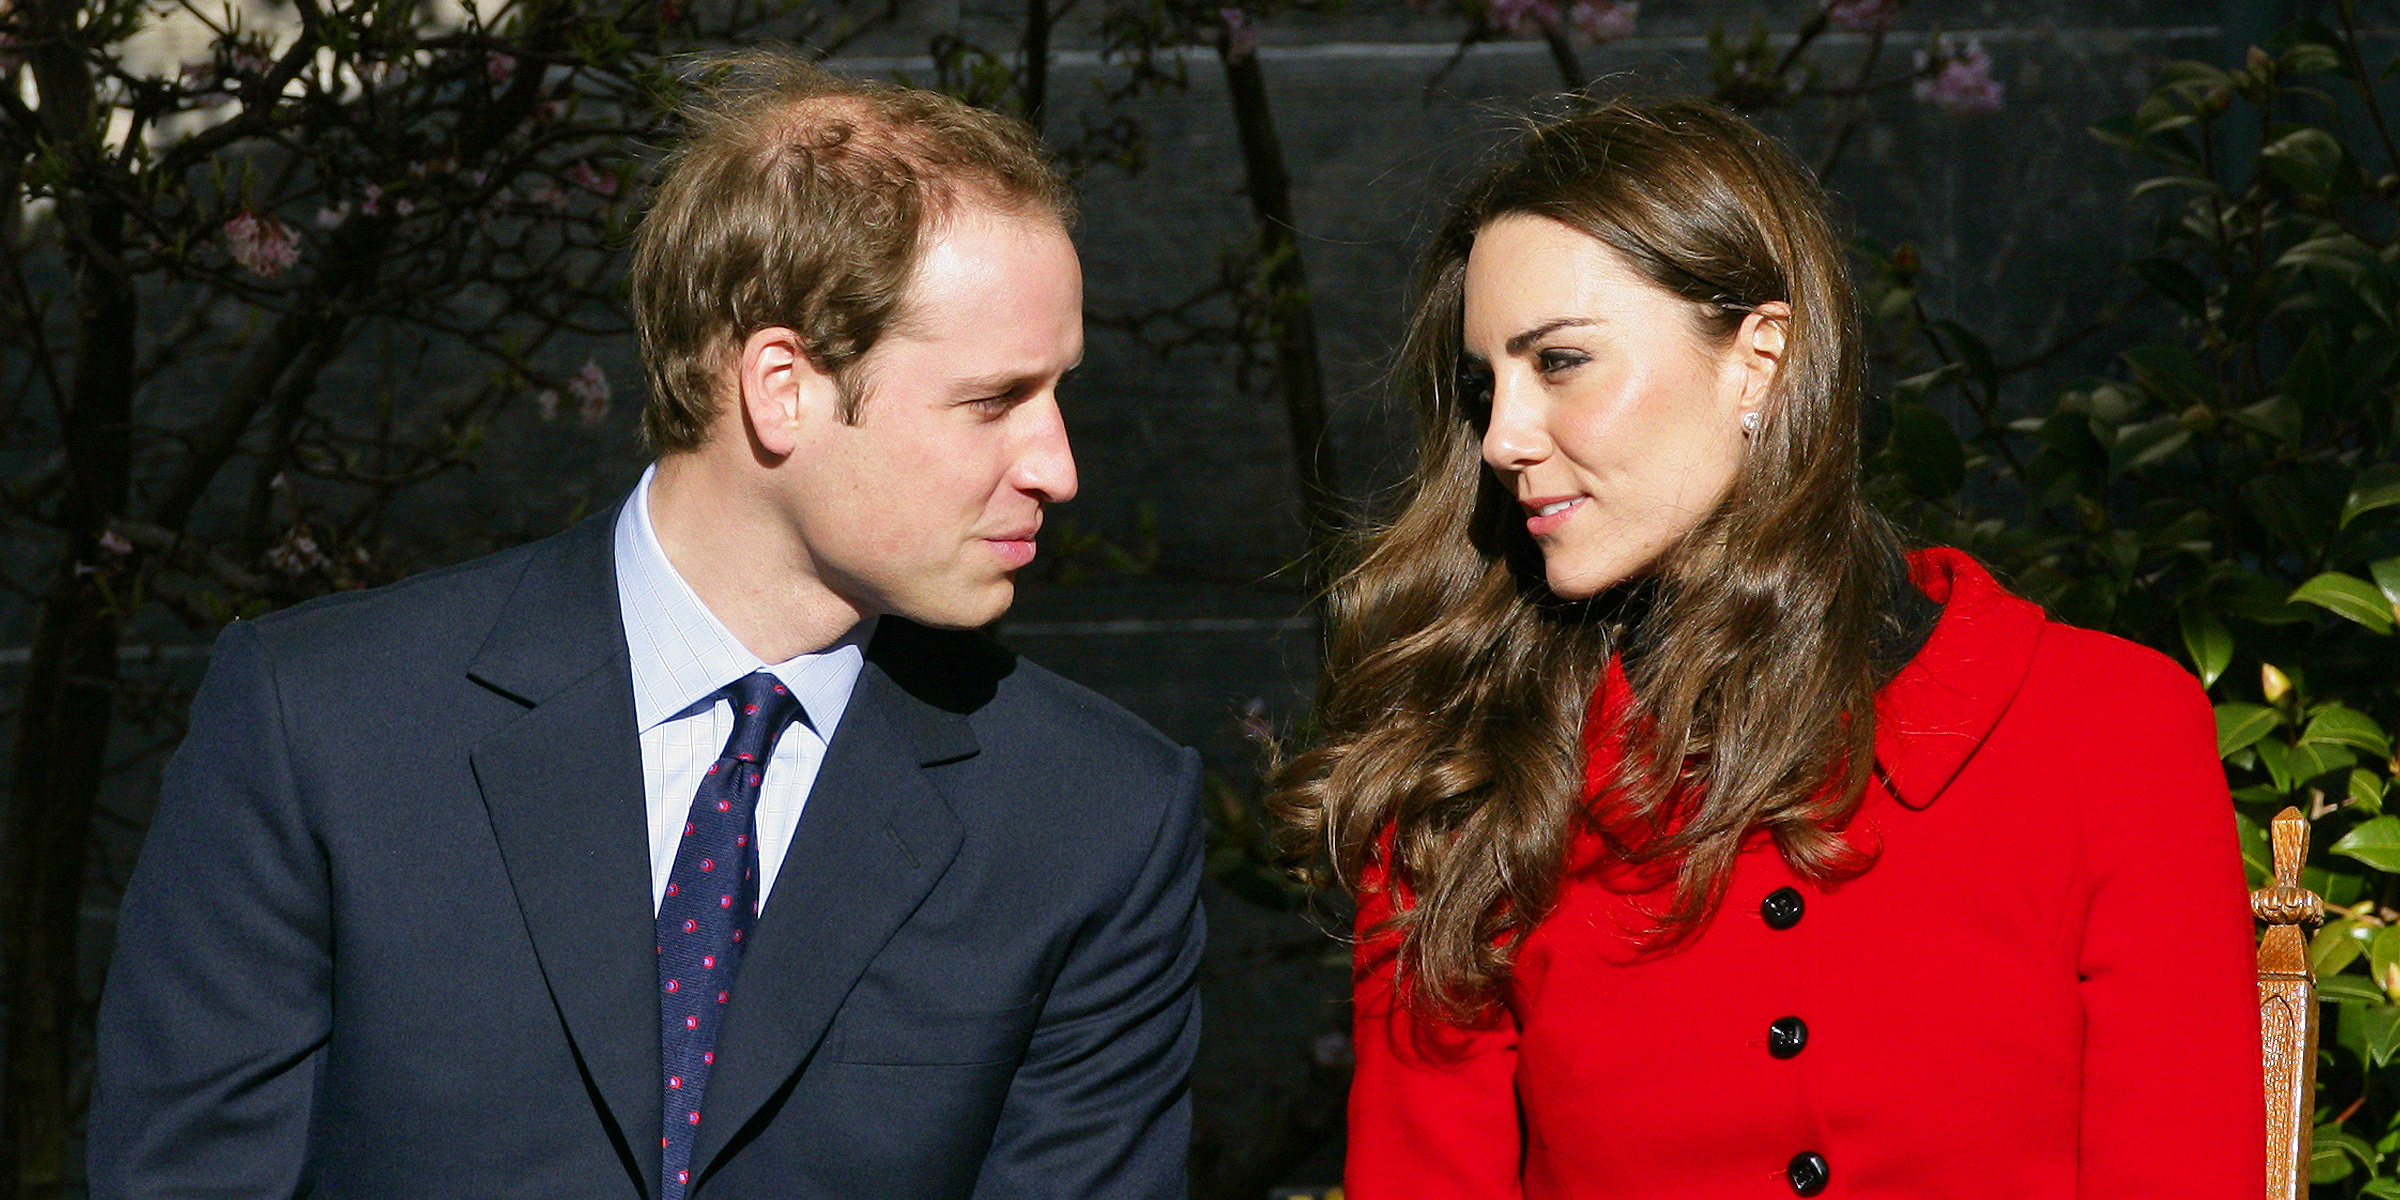 Prince William & Princess Catherine | Source: Getty Images